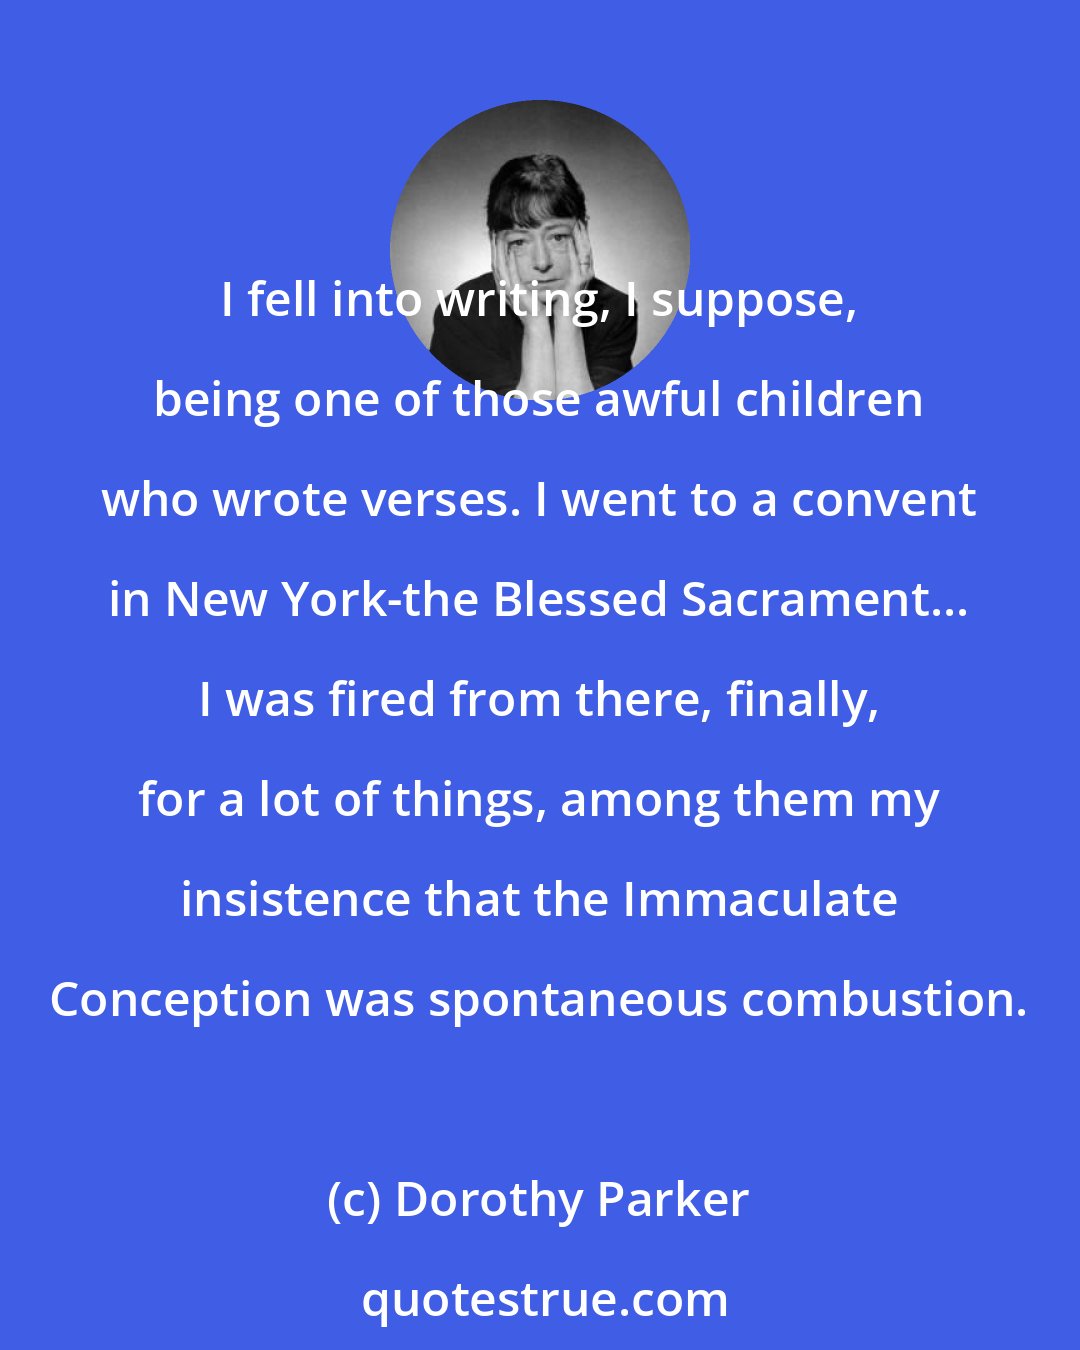 Dorothy Parker: I fell into writing, I suppose, being one of those awful children who wrote verses. I went to a convent in New York-the Blessed Sacrament... I was fired from there, finally, for a lot of things, among them my insistence that the Immaculate Conception was spontaneous combustion.